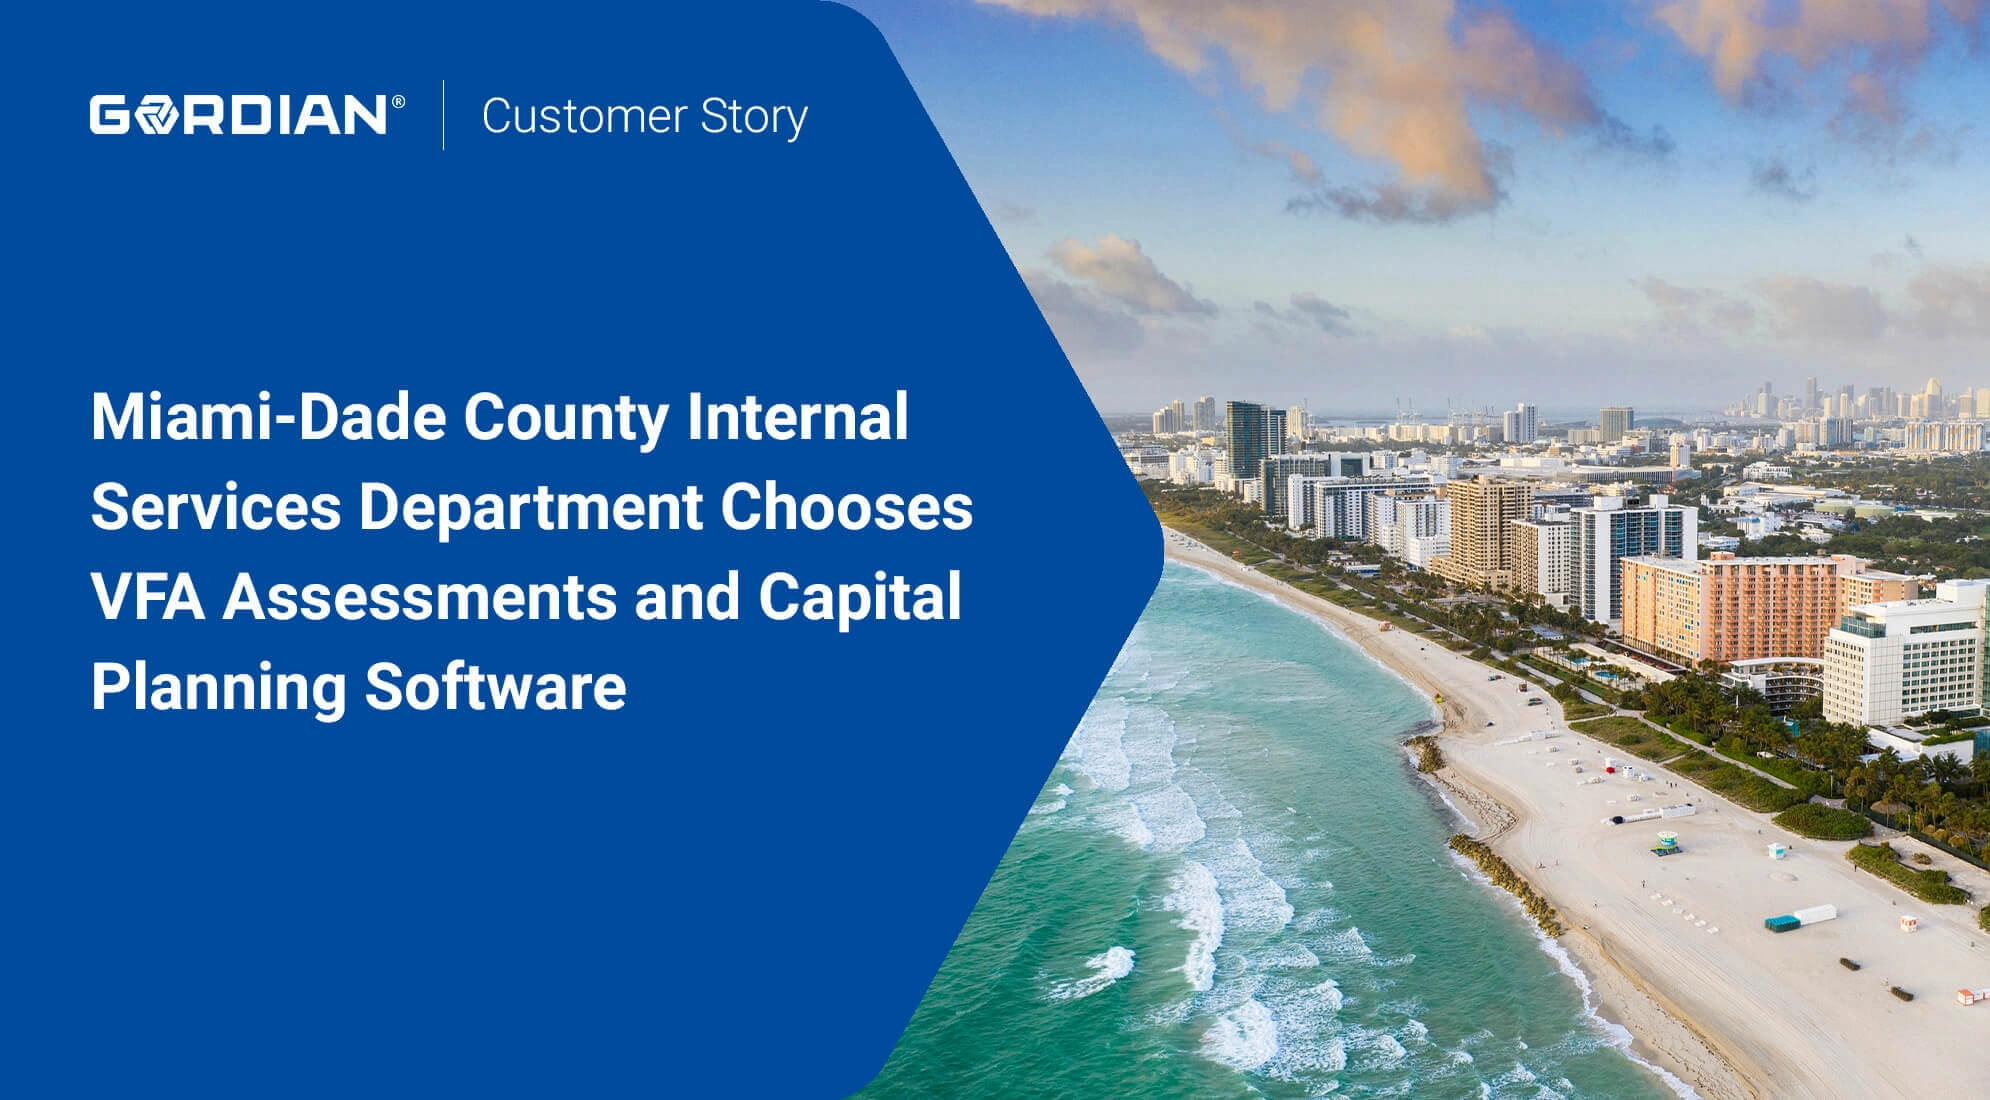 Miami-Dade County Internal Services Department Chooses VFA Assessments and Capital Planning Software